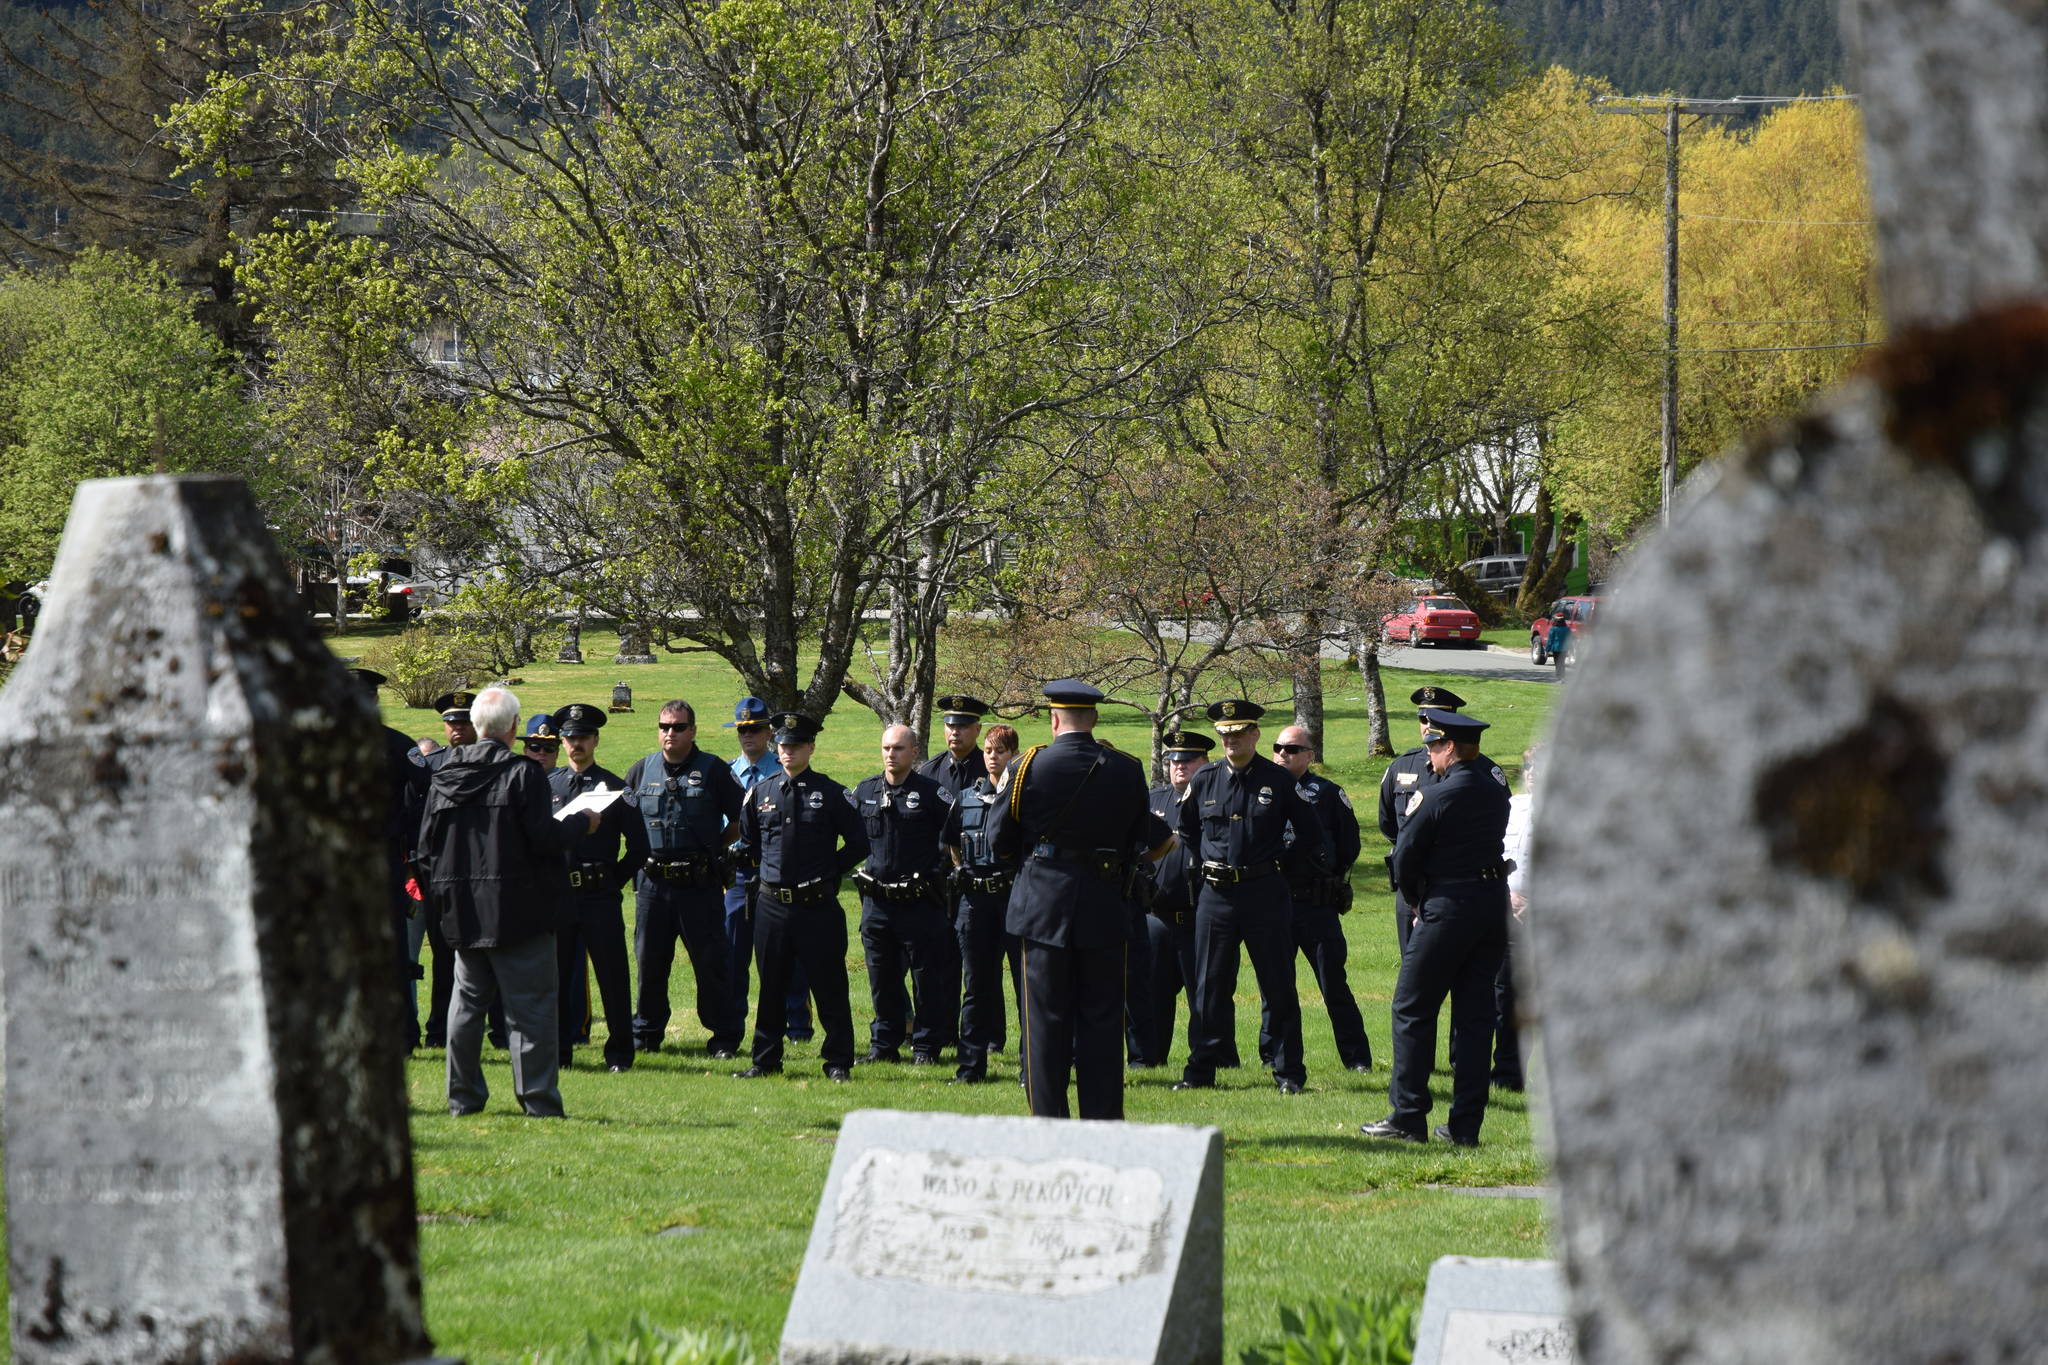 The Capital City Chapter of the Alaska Peace Officer Association hosted a wreath-laying at Evergreen Cemetery at noon Wednesday as part of its annual National Police Memorial Day ceremonies. (Liz Kellar | Juneau Empire)